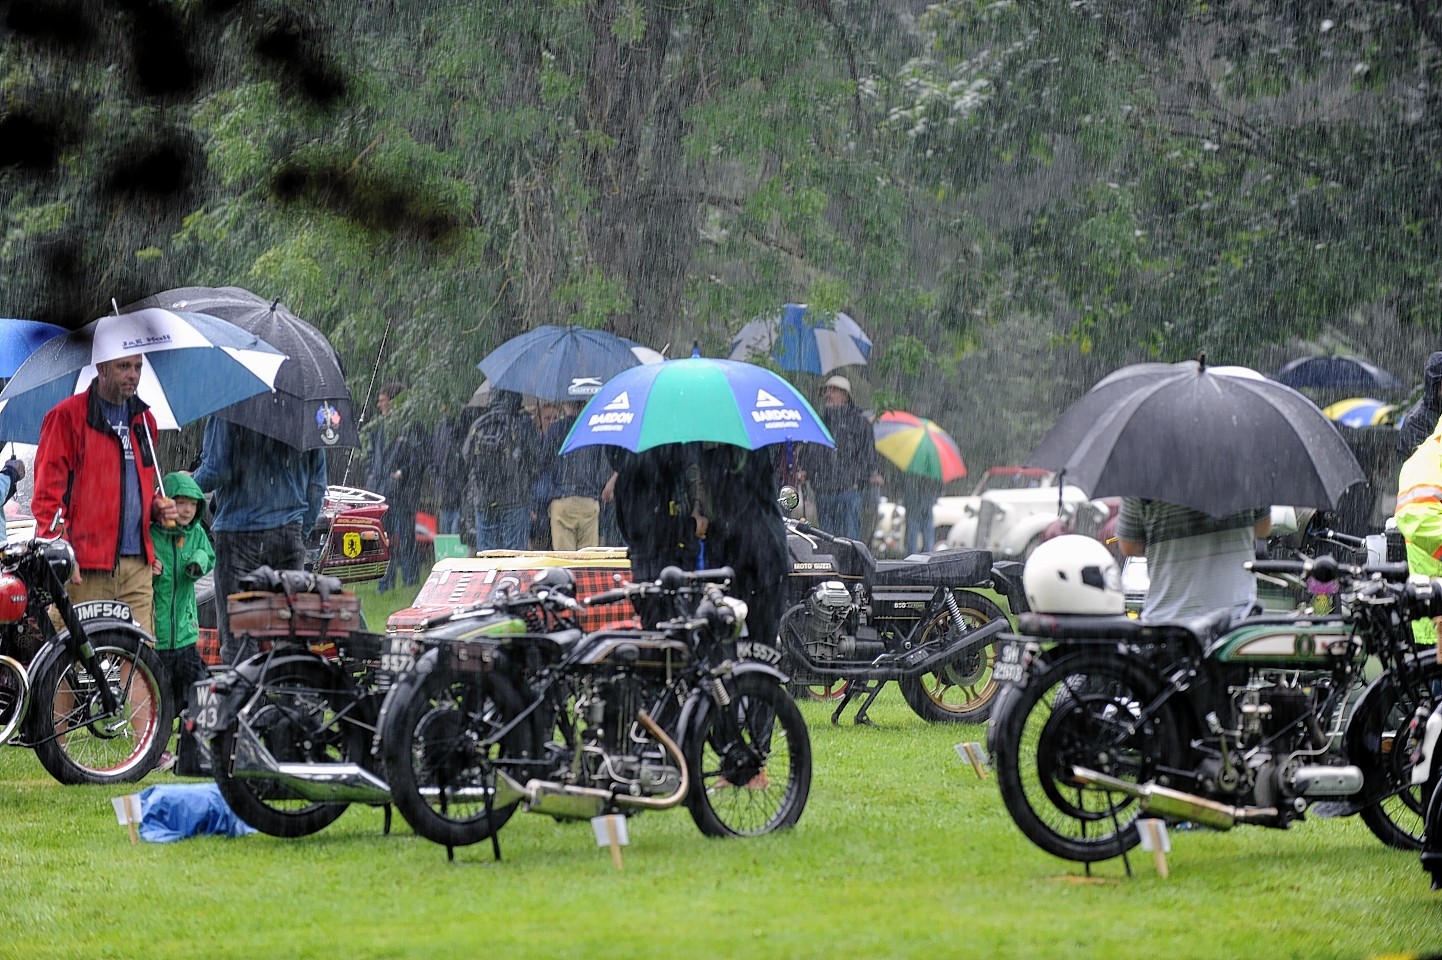 Rain falls on the show at Brodie Castle